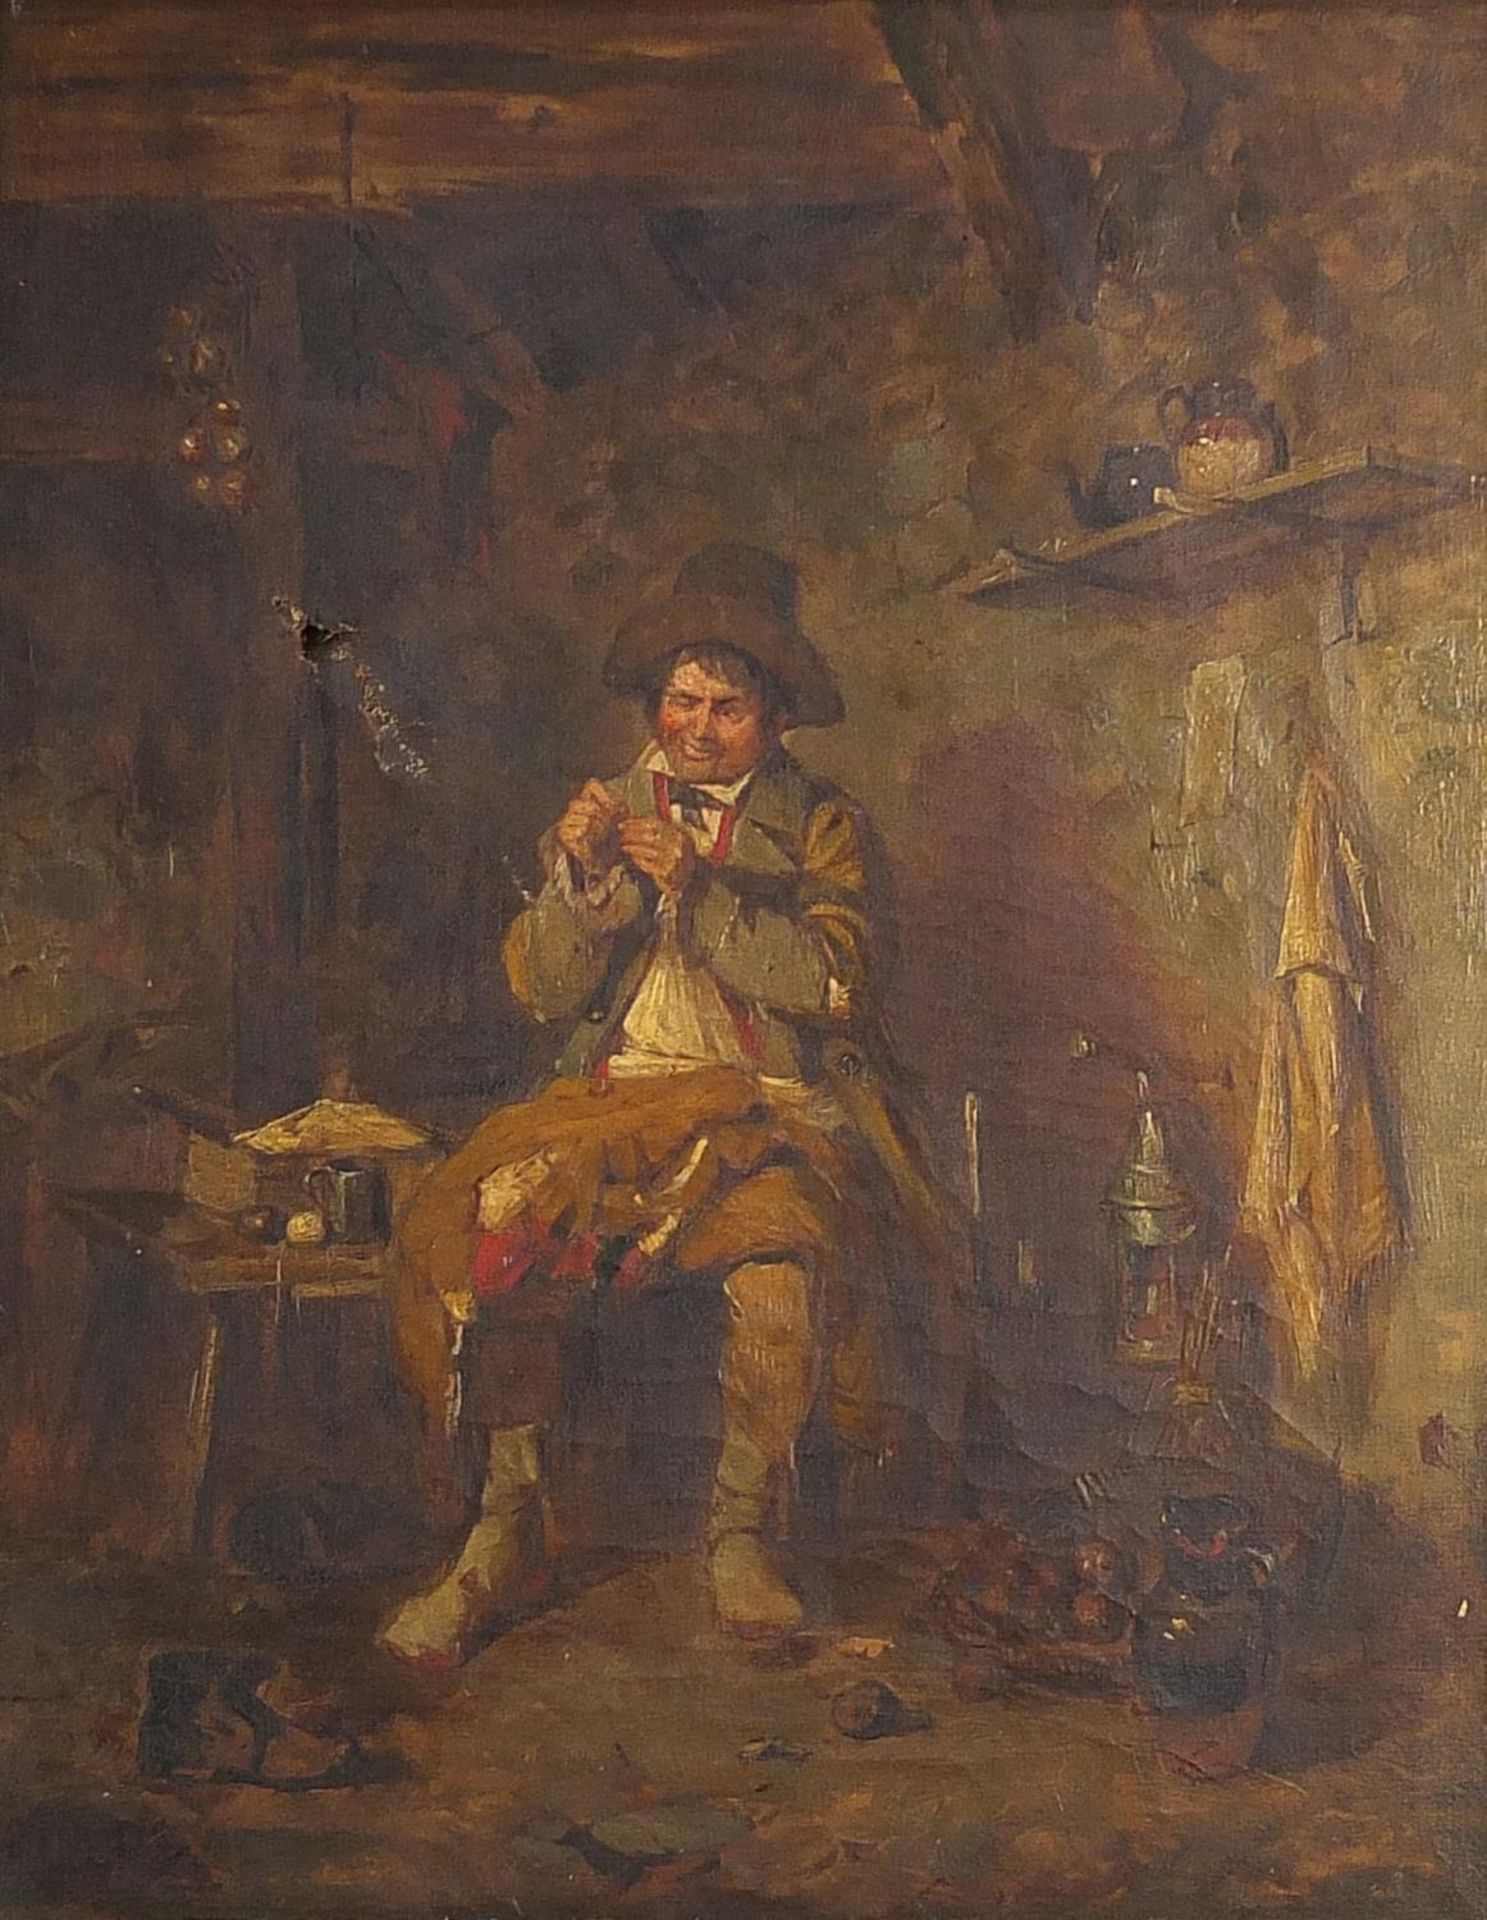 Irish tinker in an interior, 19th century oil on canvas, mounted and framed, 44.5cm x 34cm excluding